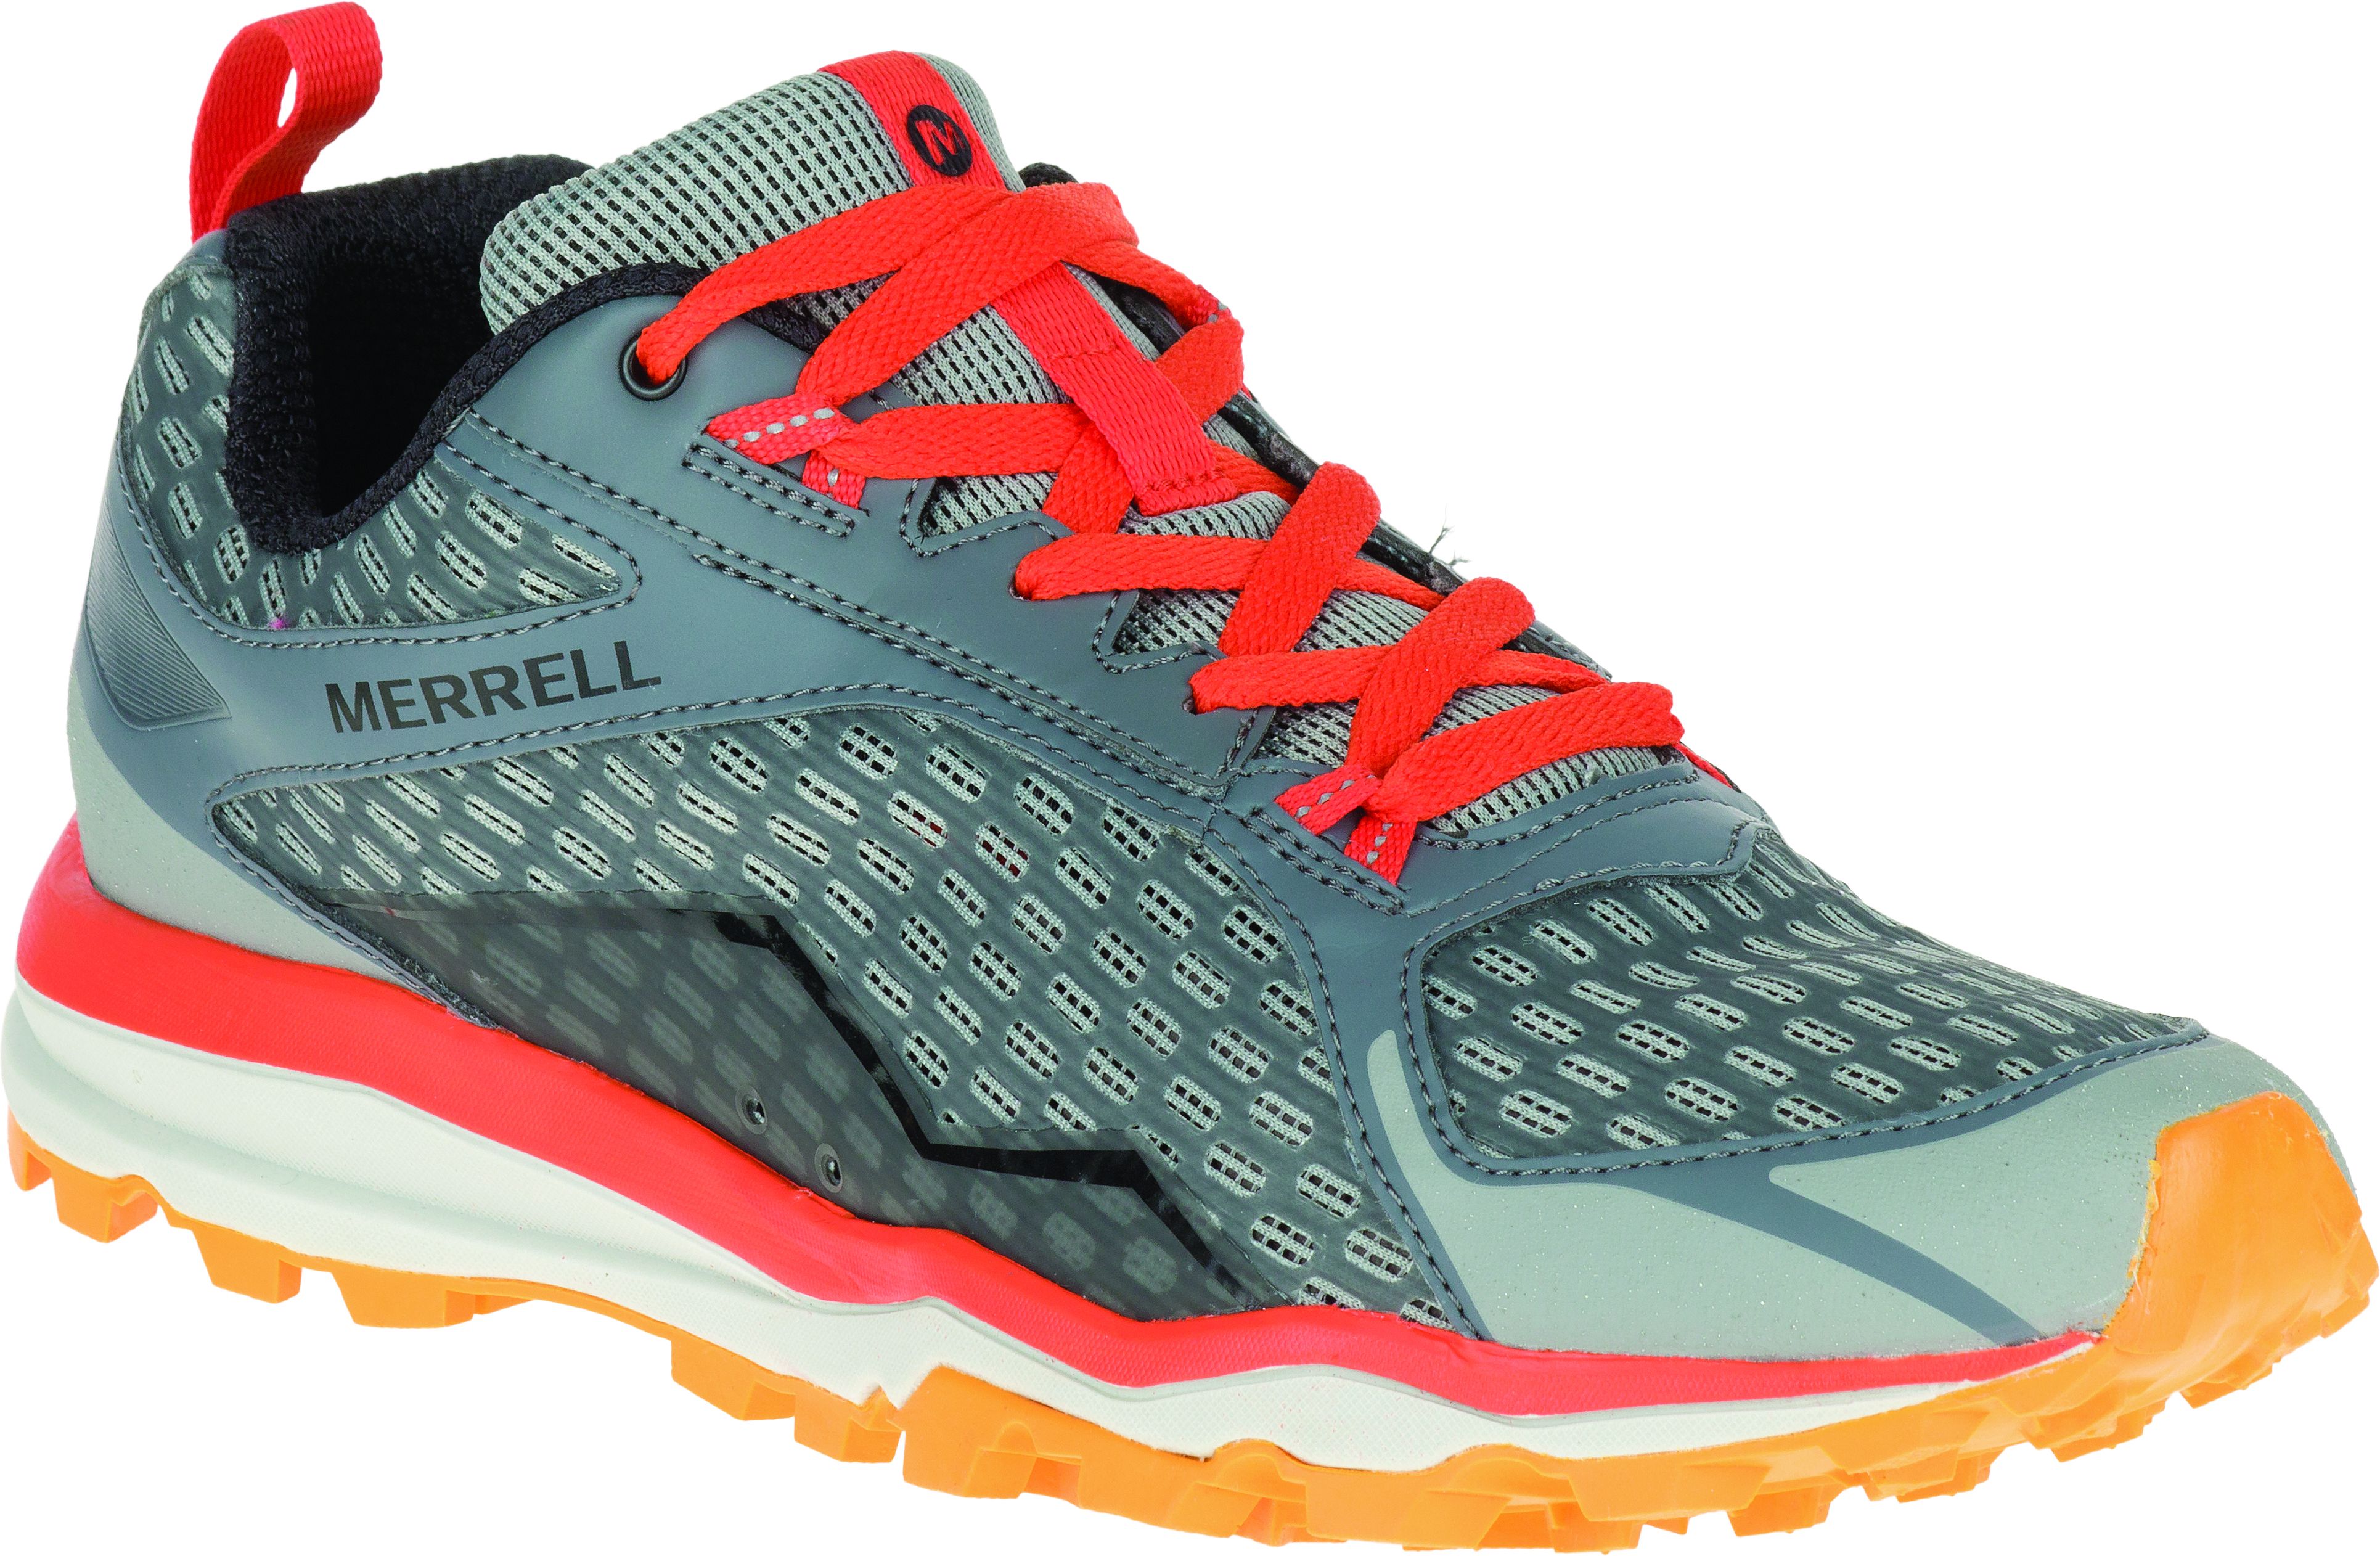 Merrell shoes that will take you 